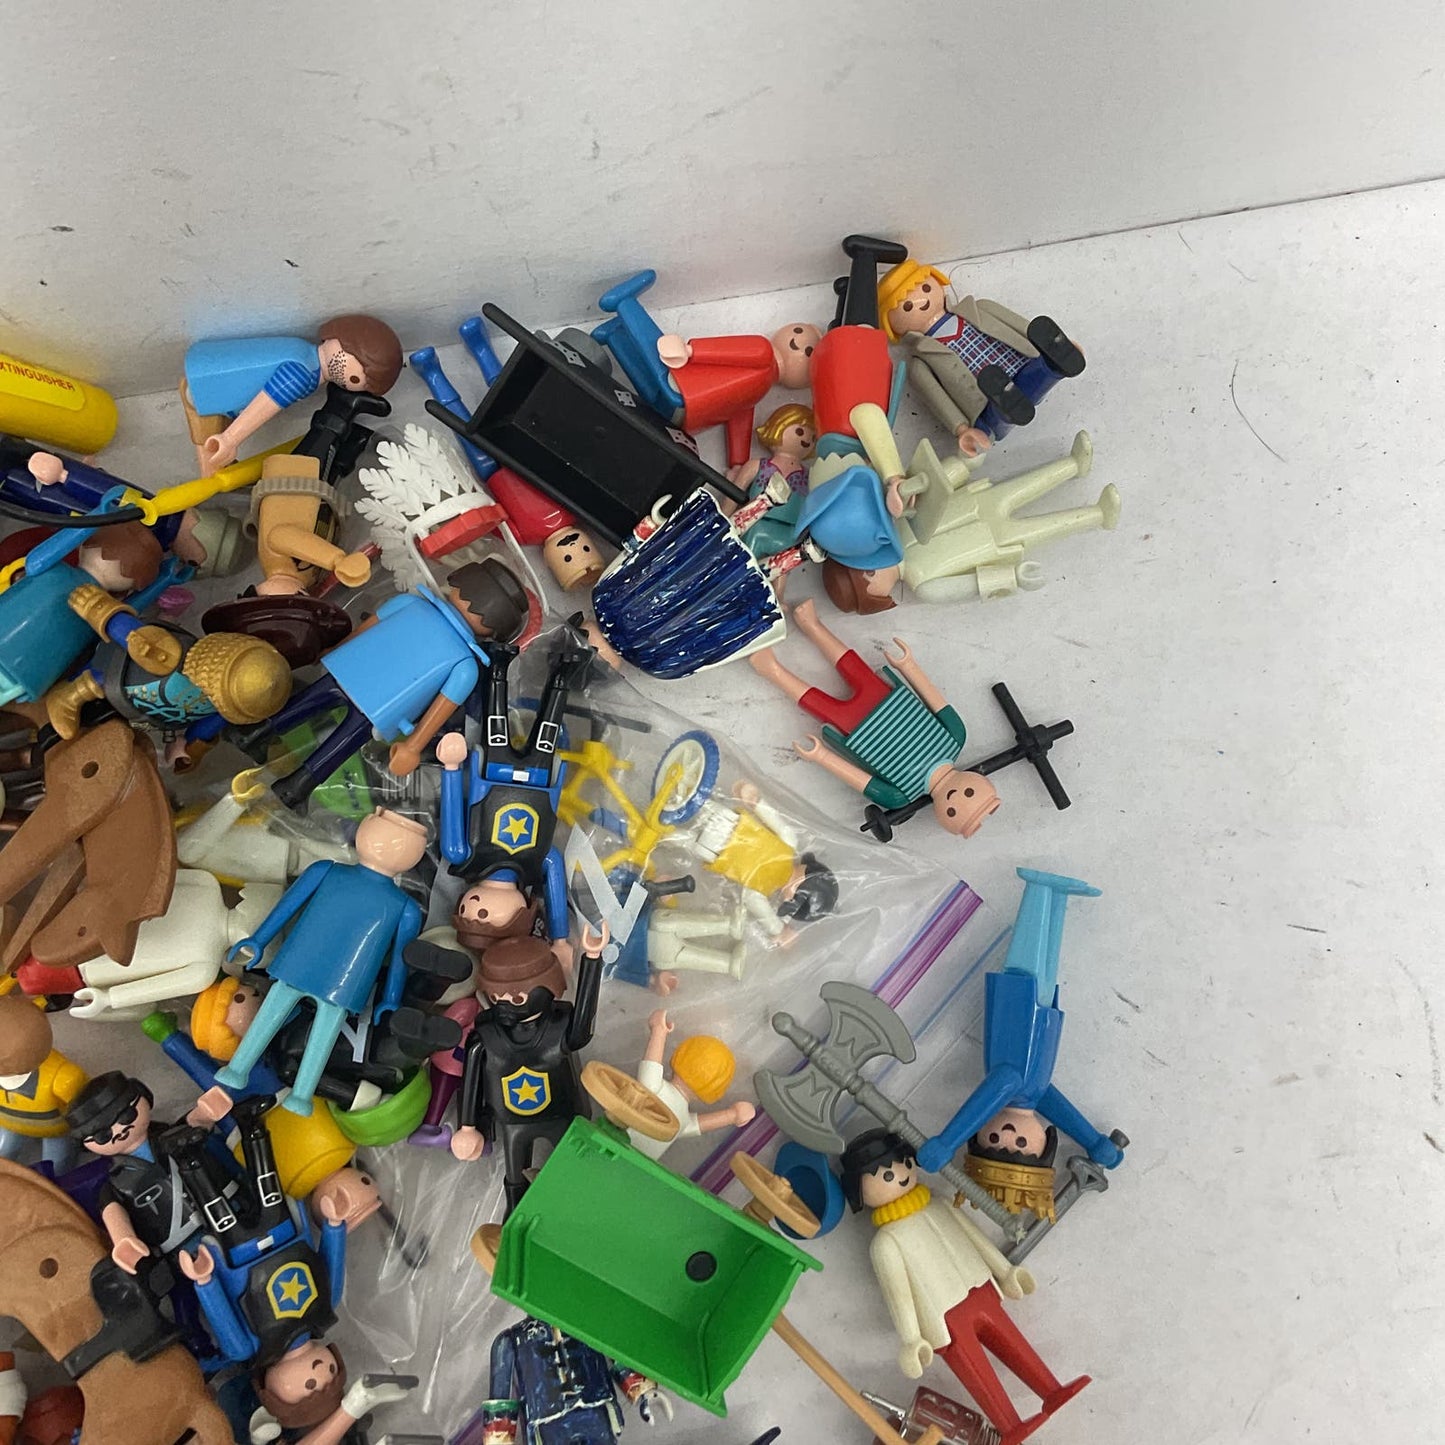 PLAYMOBIL Multicolor Figures Lot Collection Toys Minifigs - Warehouse Toys